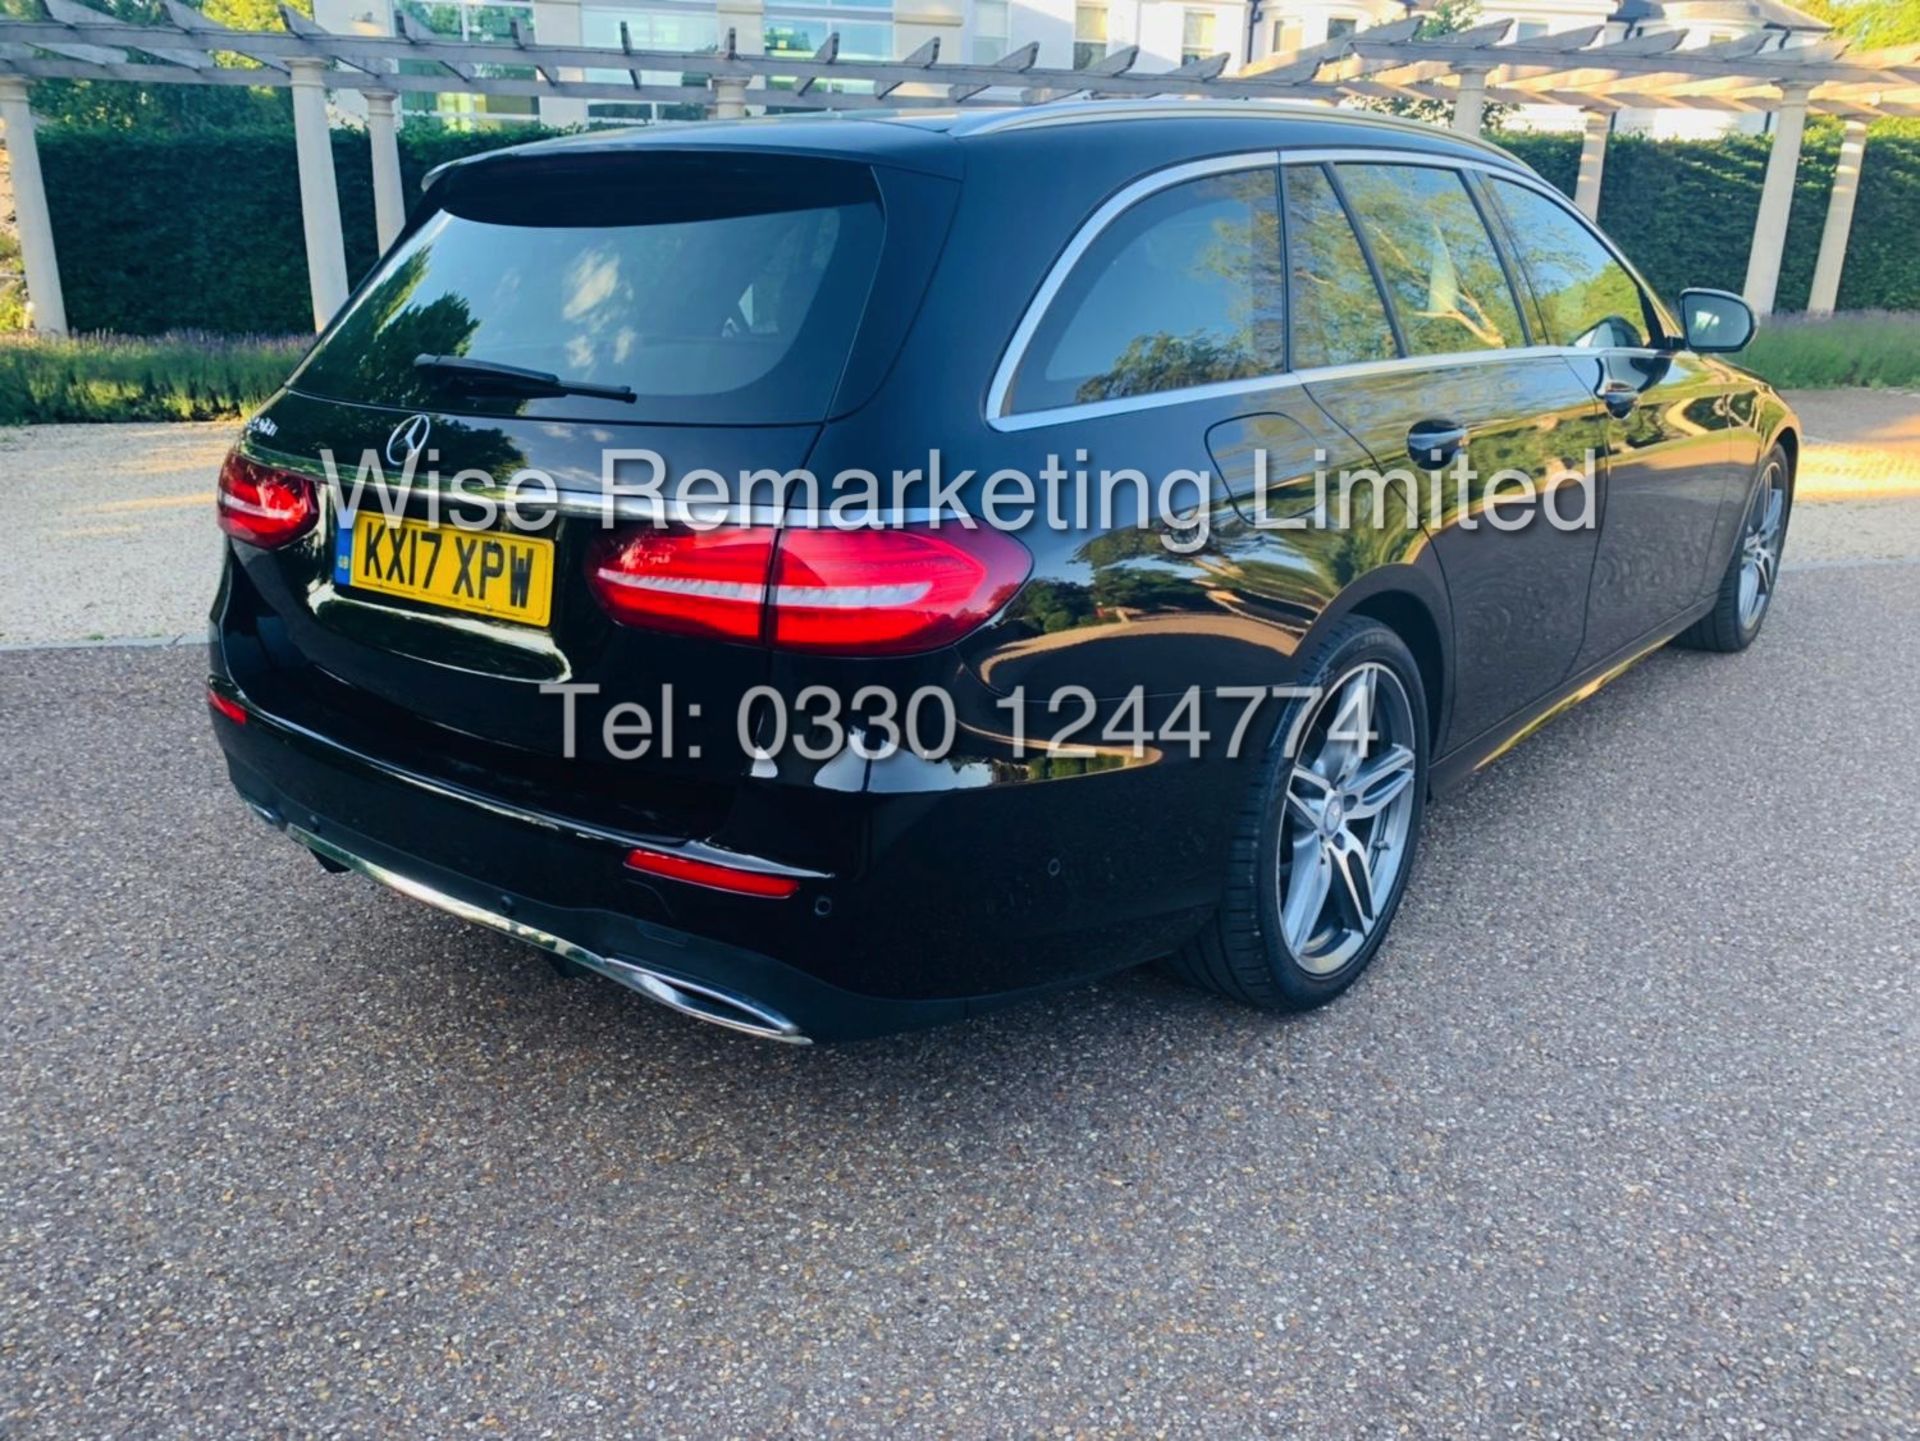 MERCEDES E CLASS ESTATE E220D AMG LINE 2017 / 9G -TRONIC / *LOW MILES* / 1 OWNER - Image 12 of 42